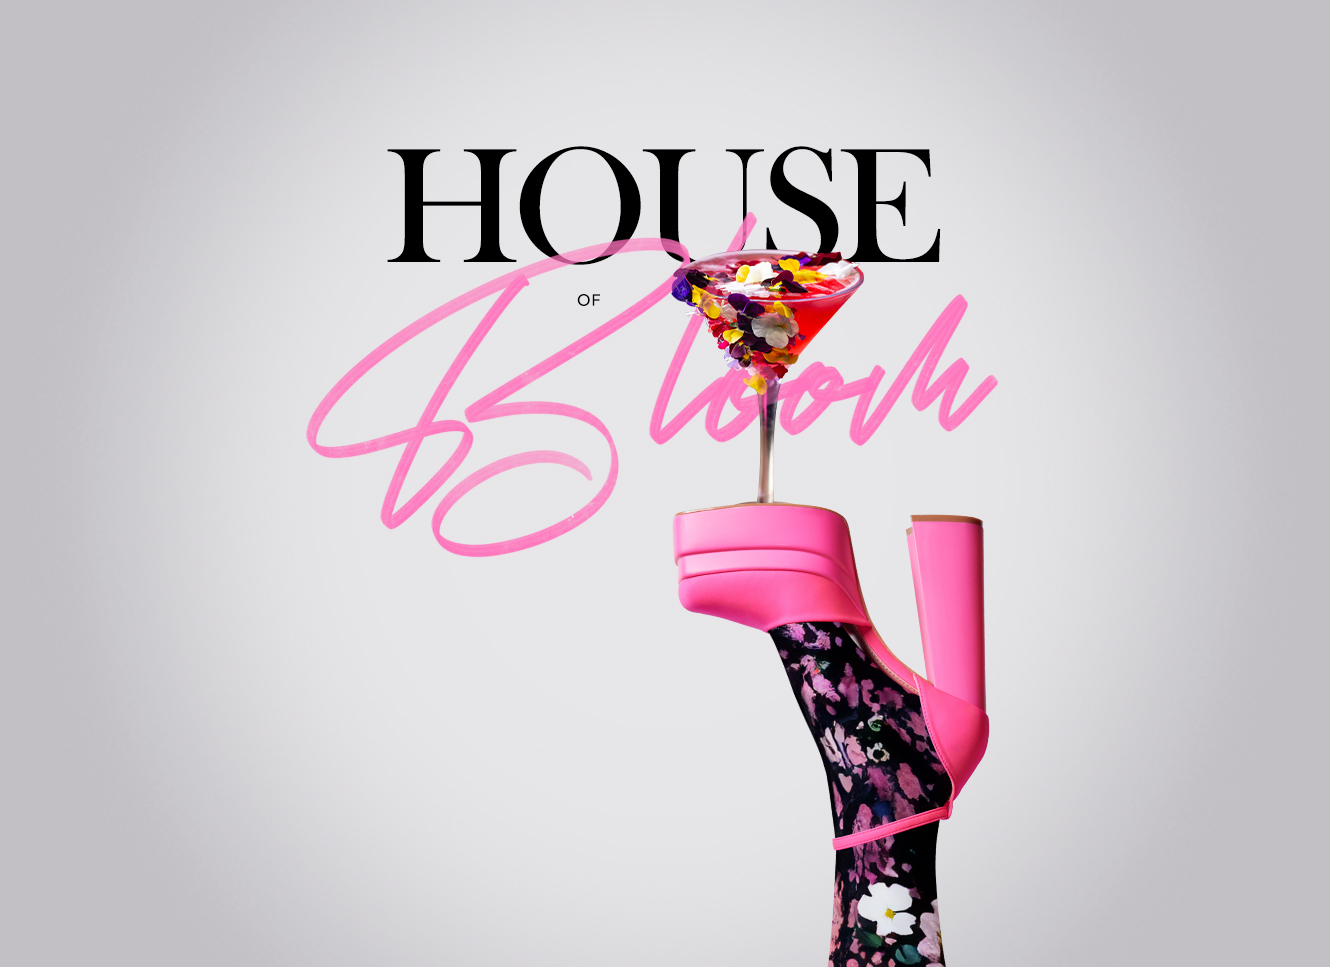 House of Bloom